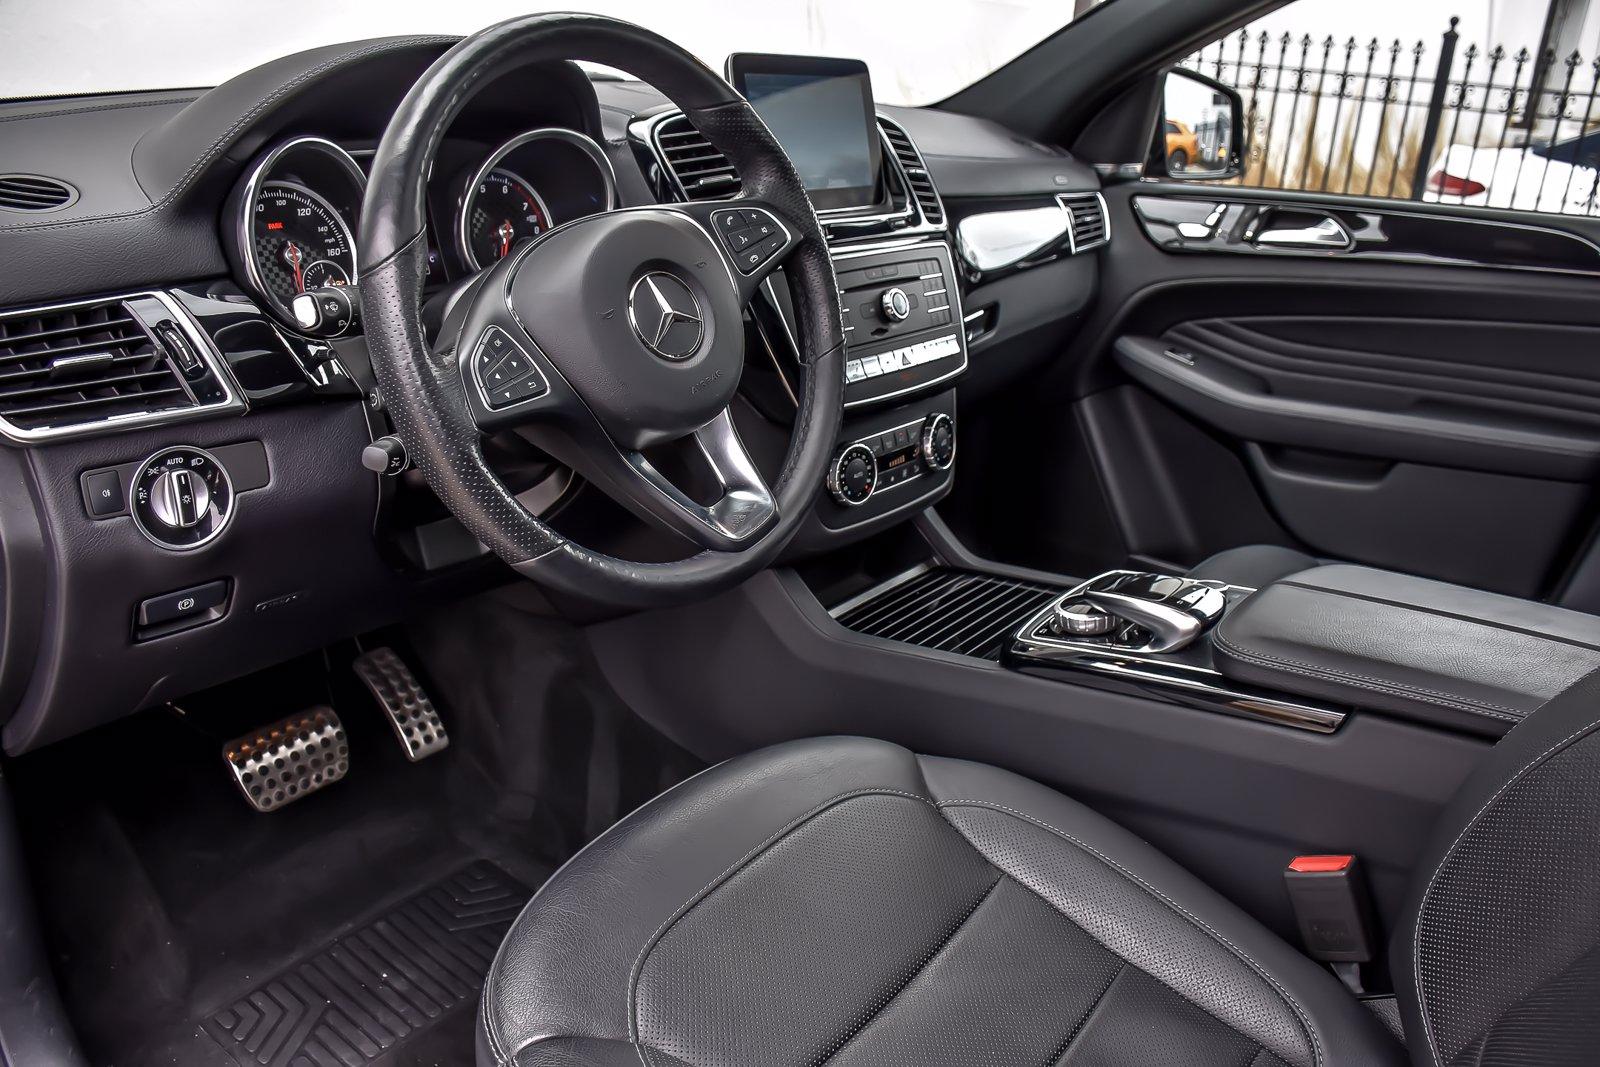 Used 2017 Mercedes-Benz GLE 43 AMG, Premium 3 Pkg, | Downers Grove, IL